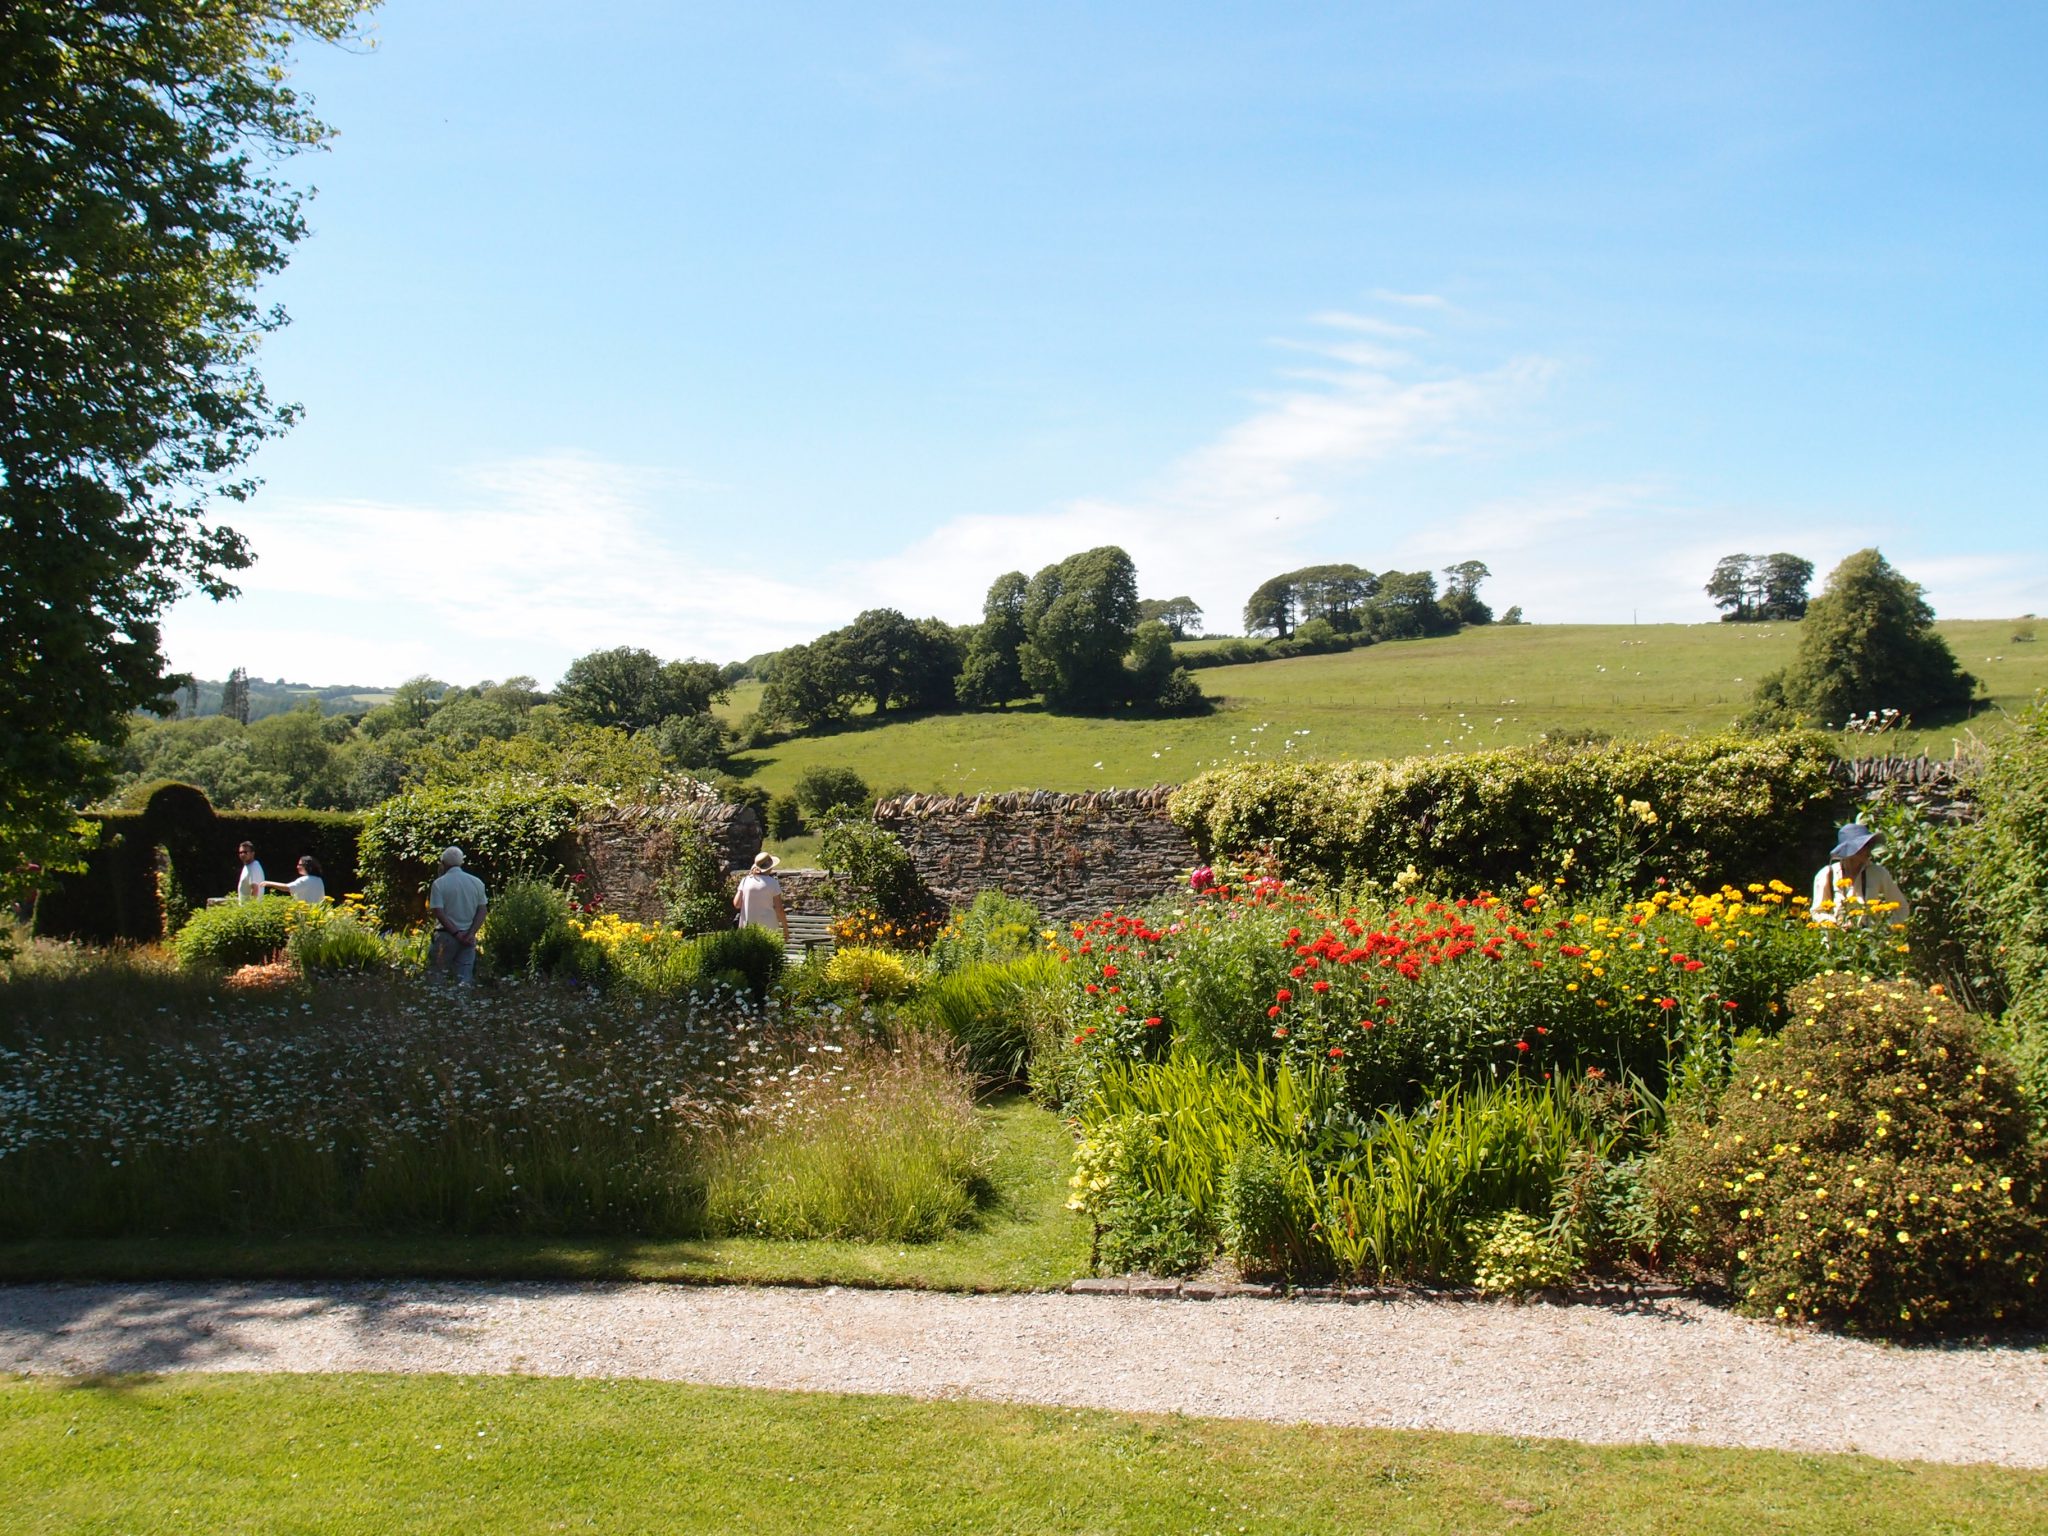 We're now within the public section of the Cider House Garden, with wonderful views of the Estate's hillsides, where flocks of sheep graze.